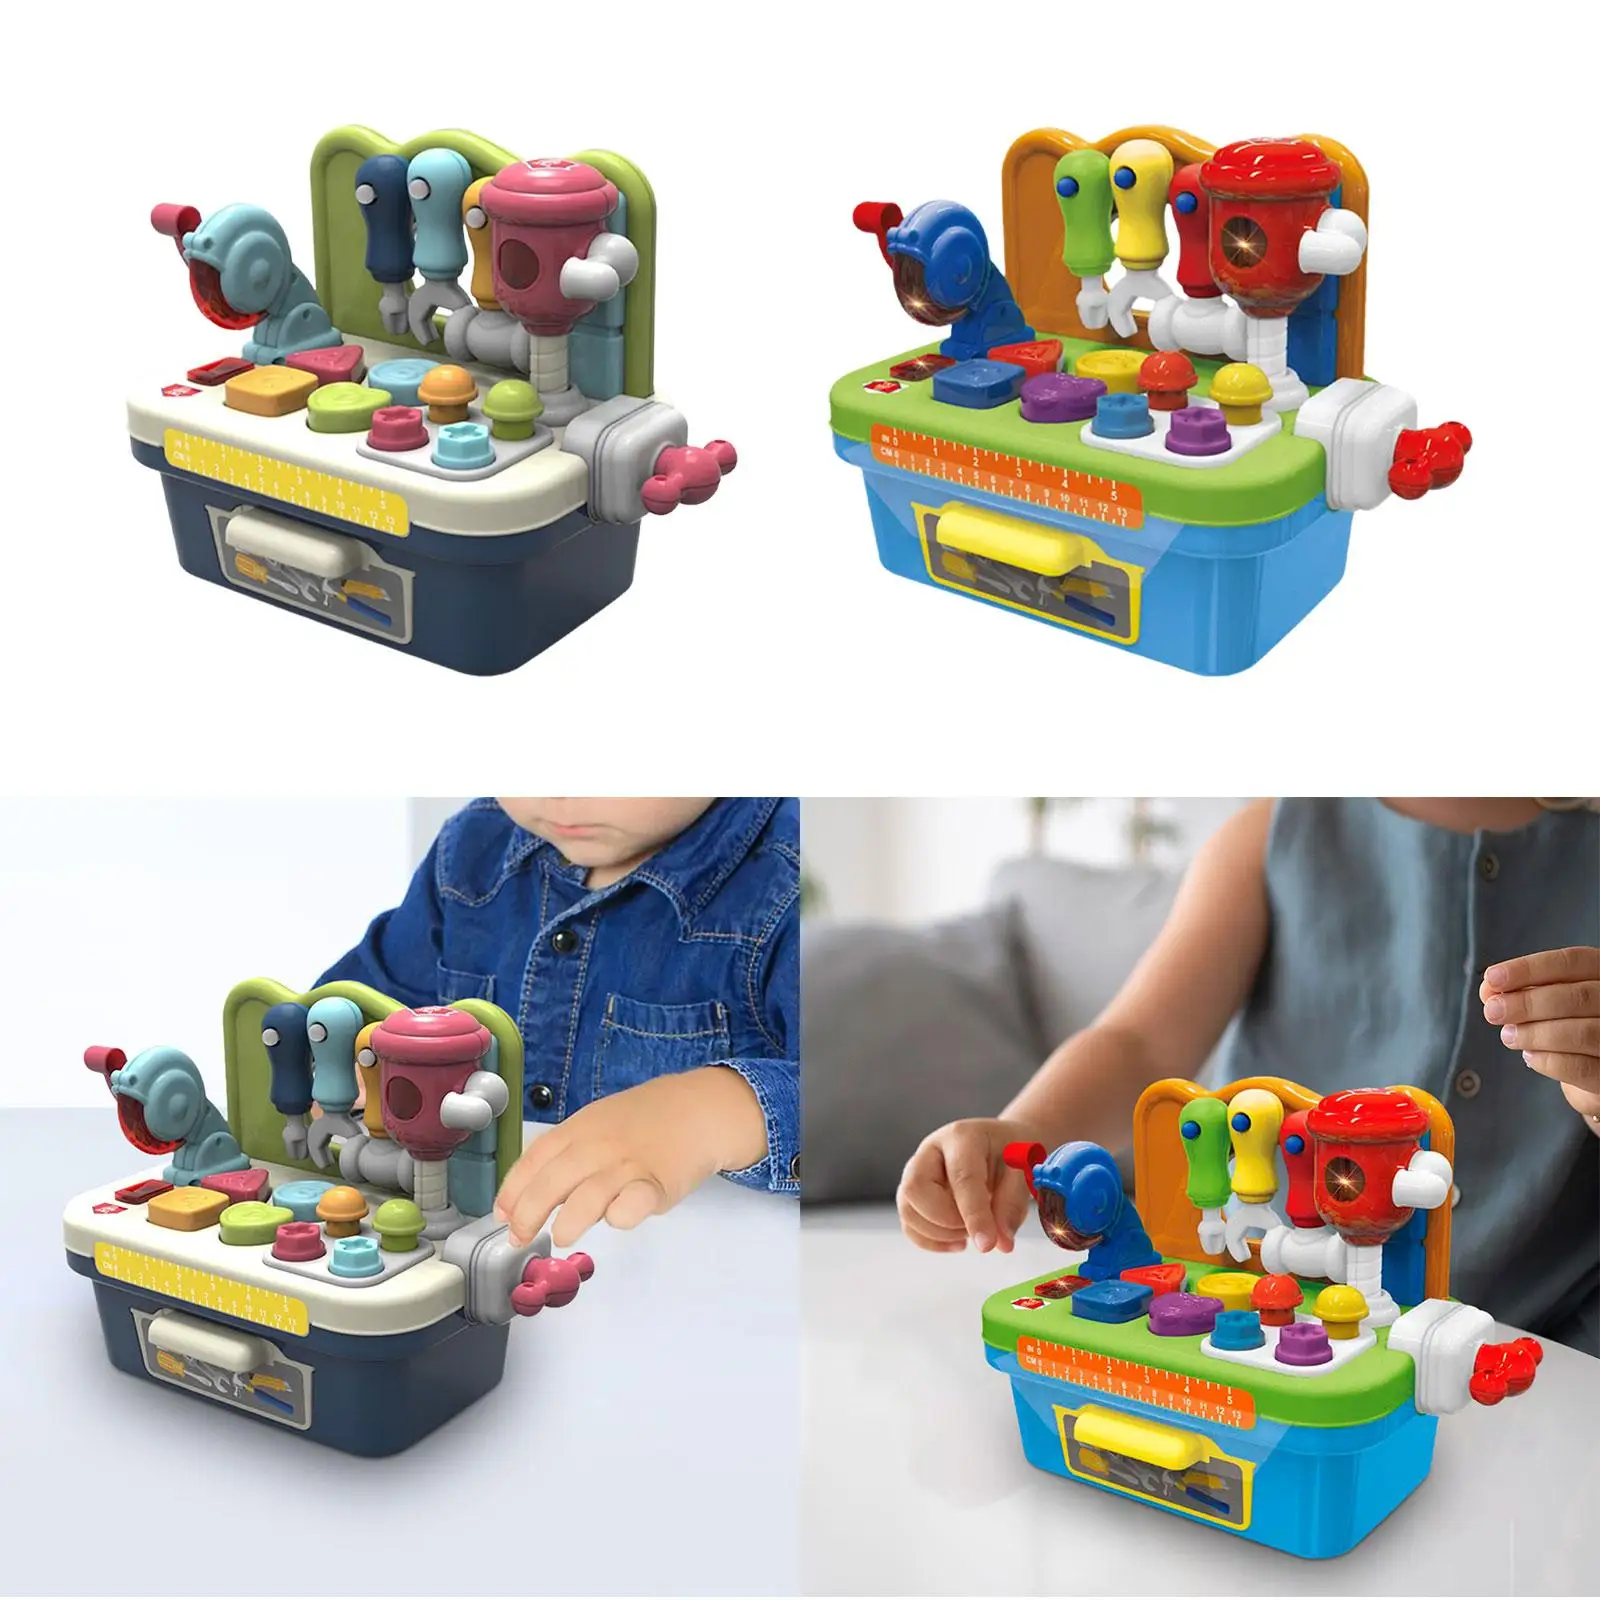 Construction Workbench Toy with Sound Effect and Light with Shape Sorter Tool Kids Tool Bench for 1 2 3 4 Years Old Baby Kids